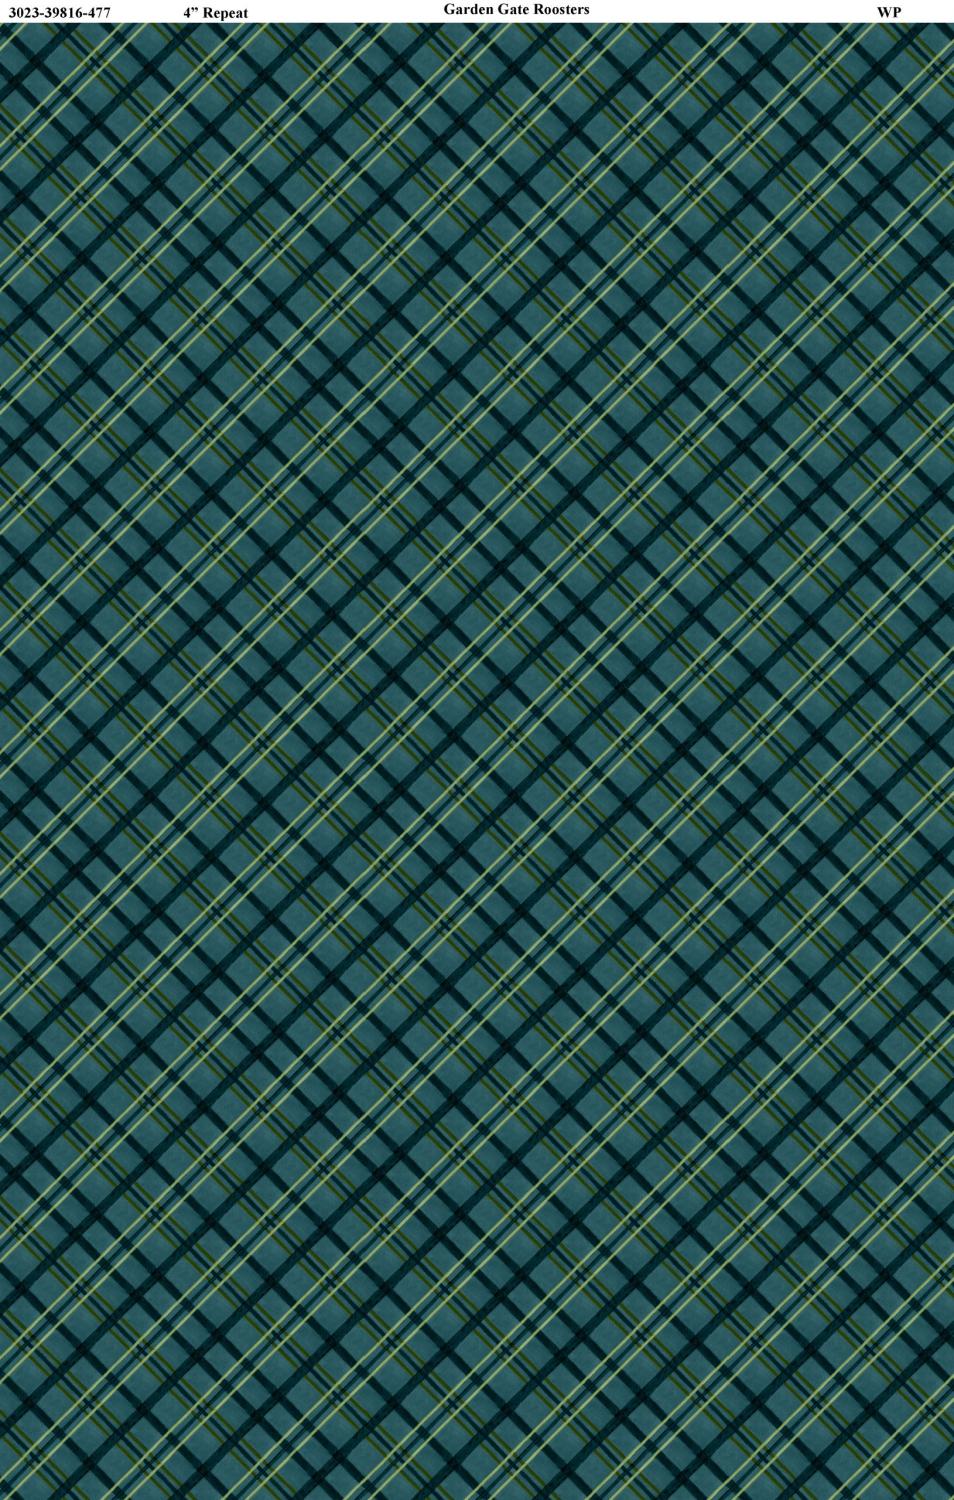 Garden Gate Roosters Plaid Teal